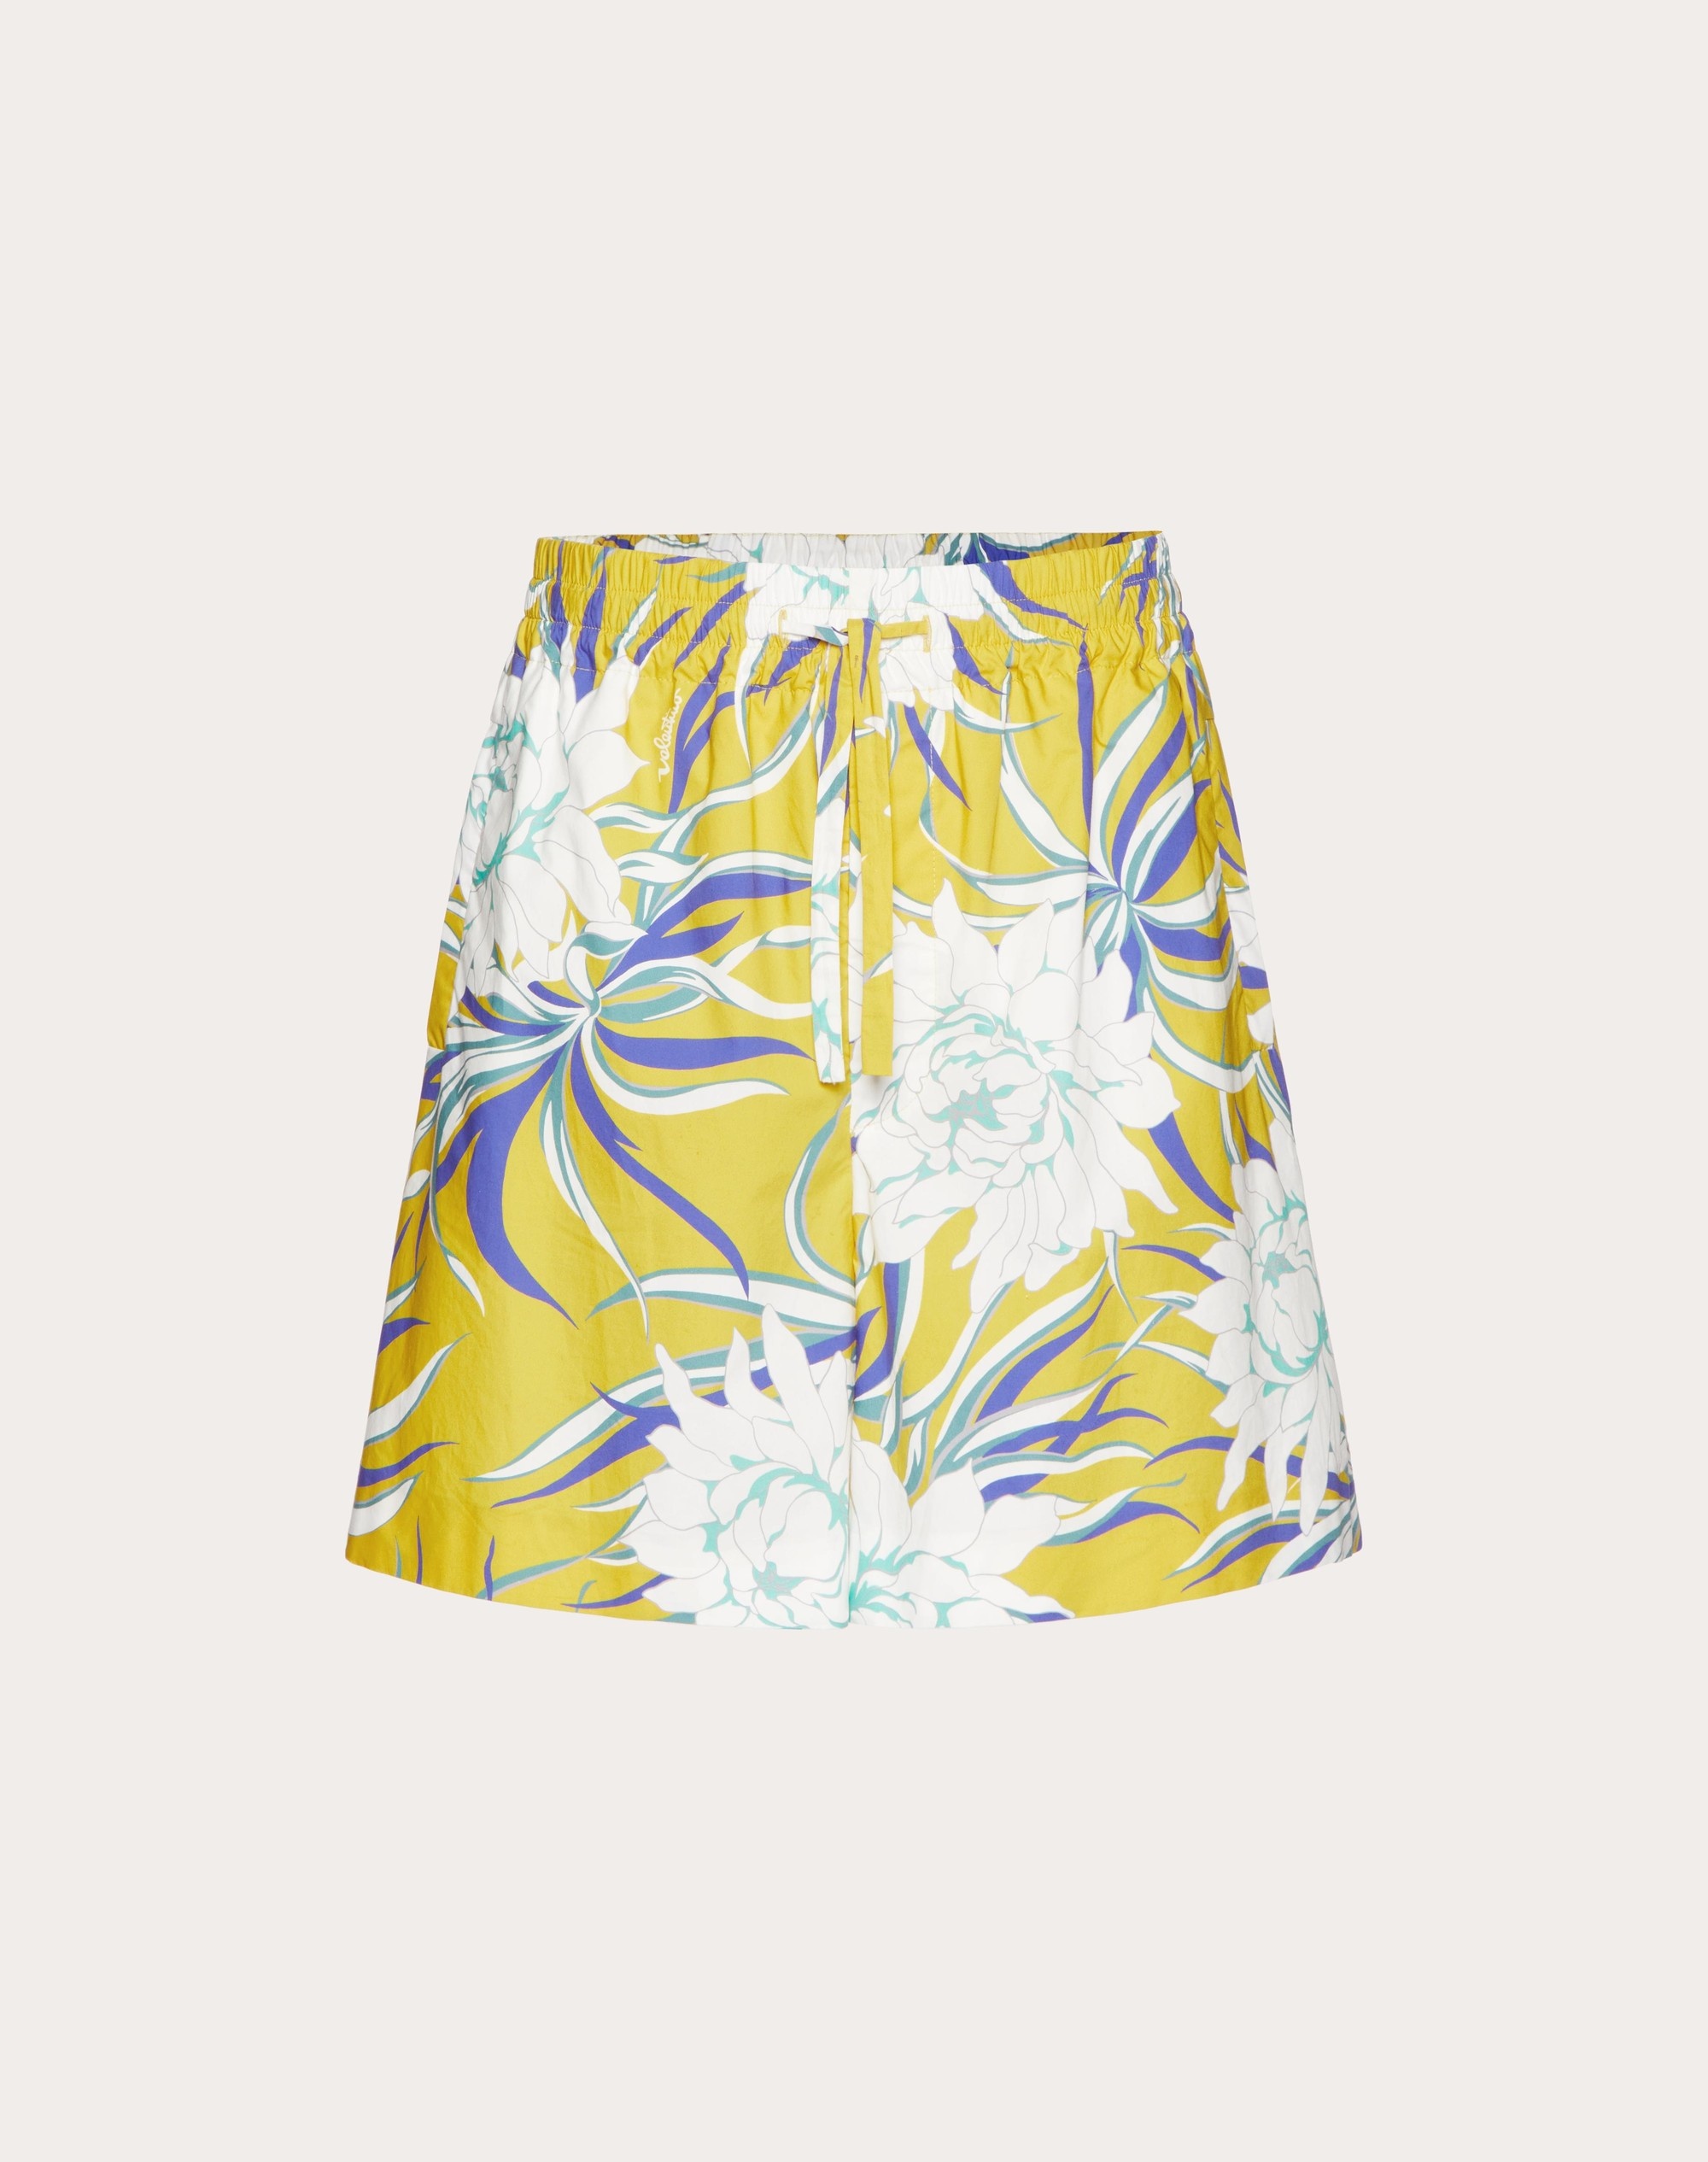 COTTON POPLIN BERMUDA SHORTS WITH STREET FLOWERS COUTURE PEONIES PRINT - 1